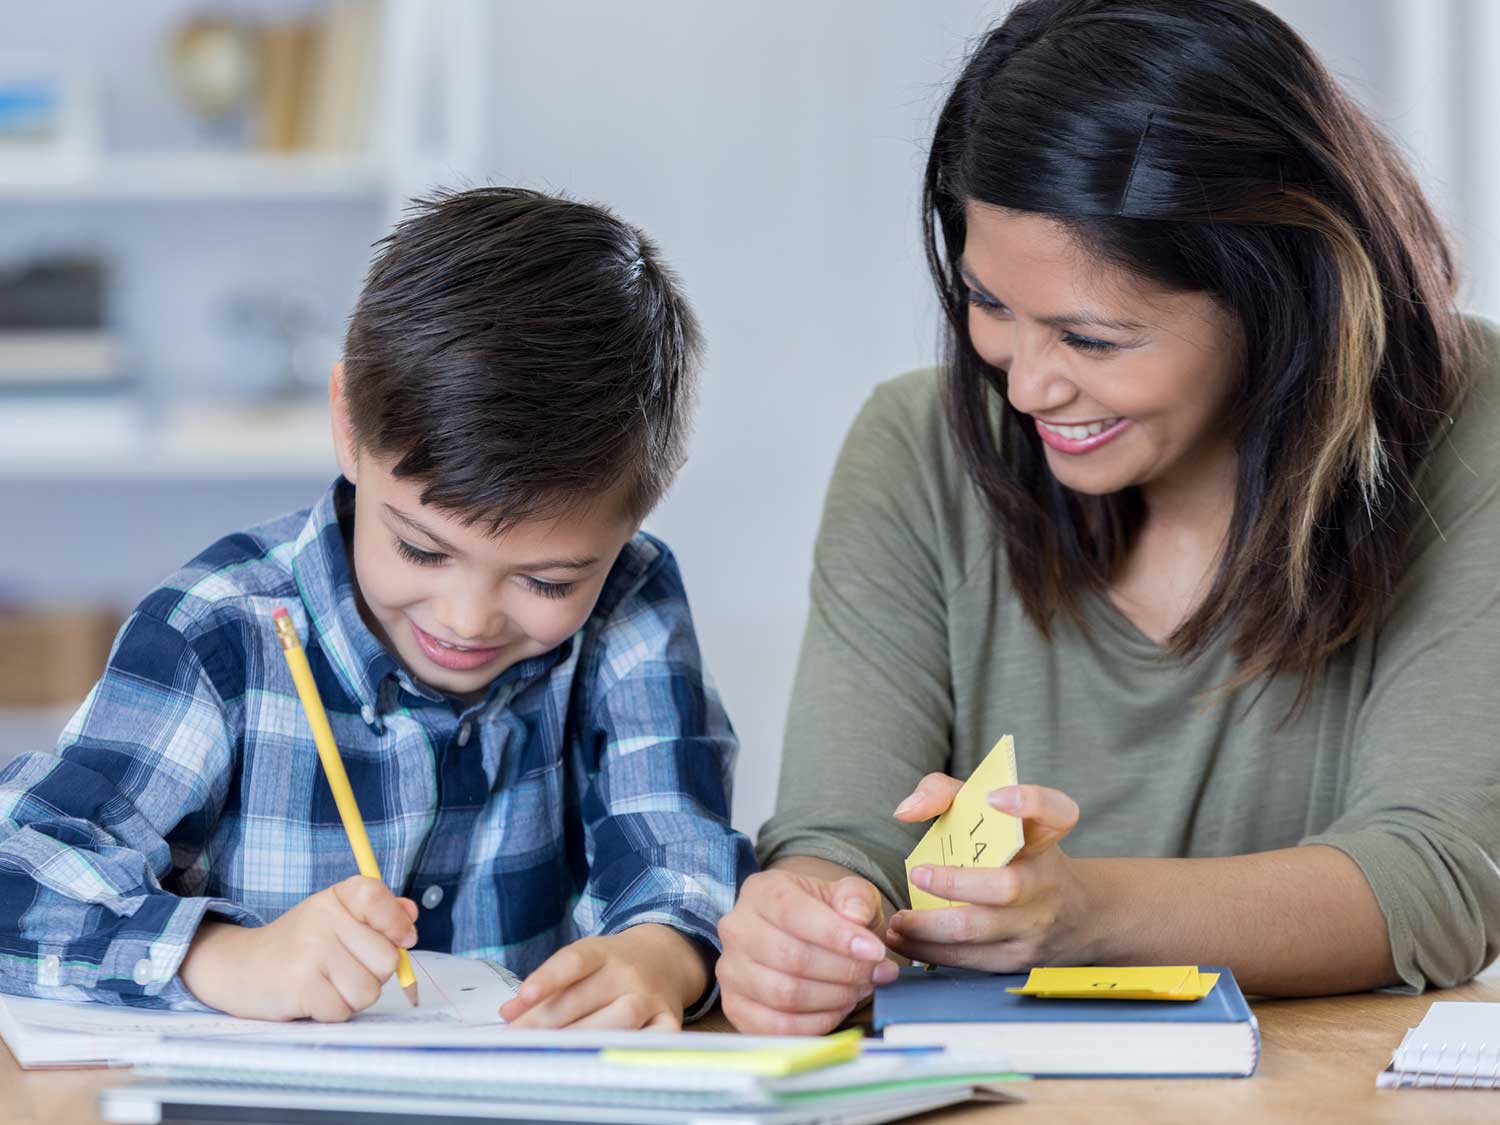 Homework for young children: Is it justified?